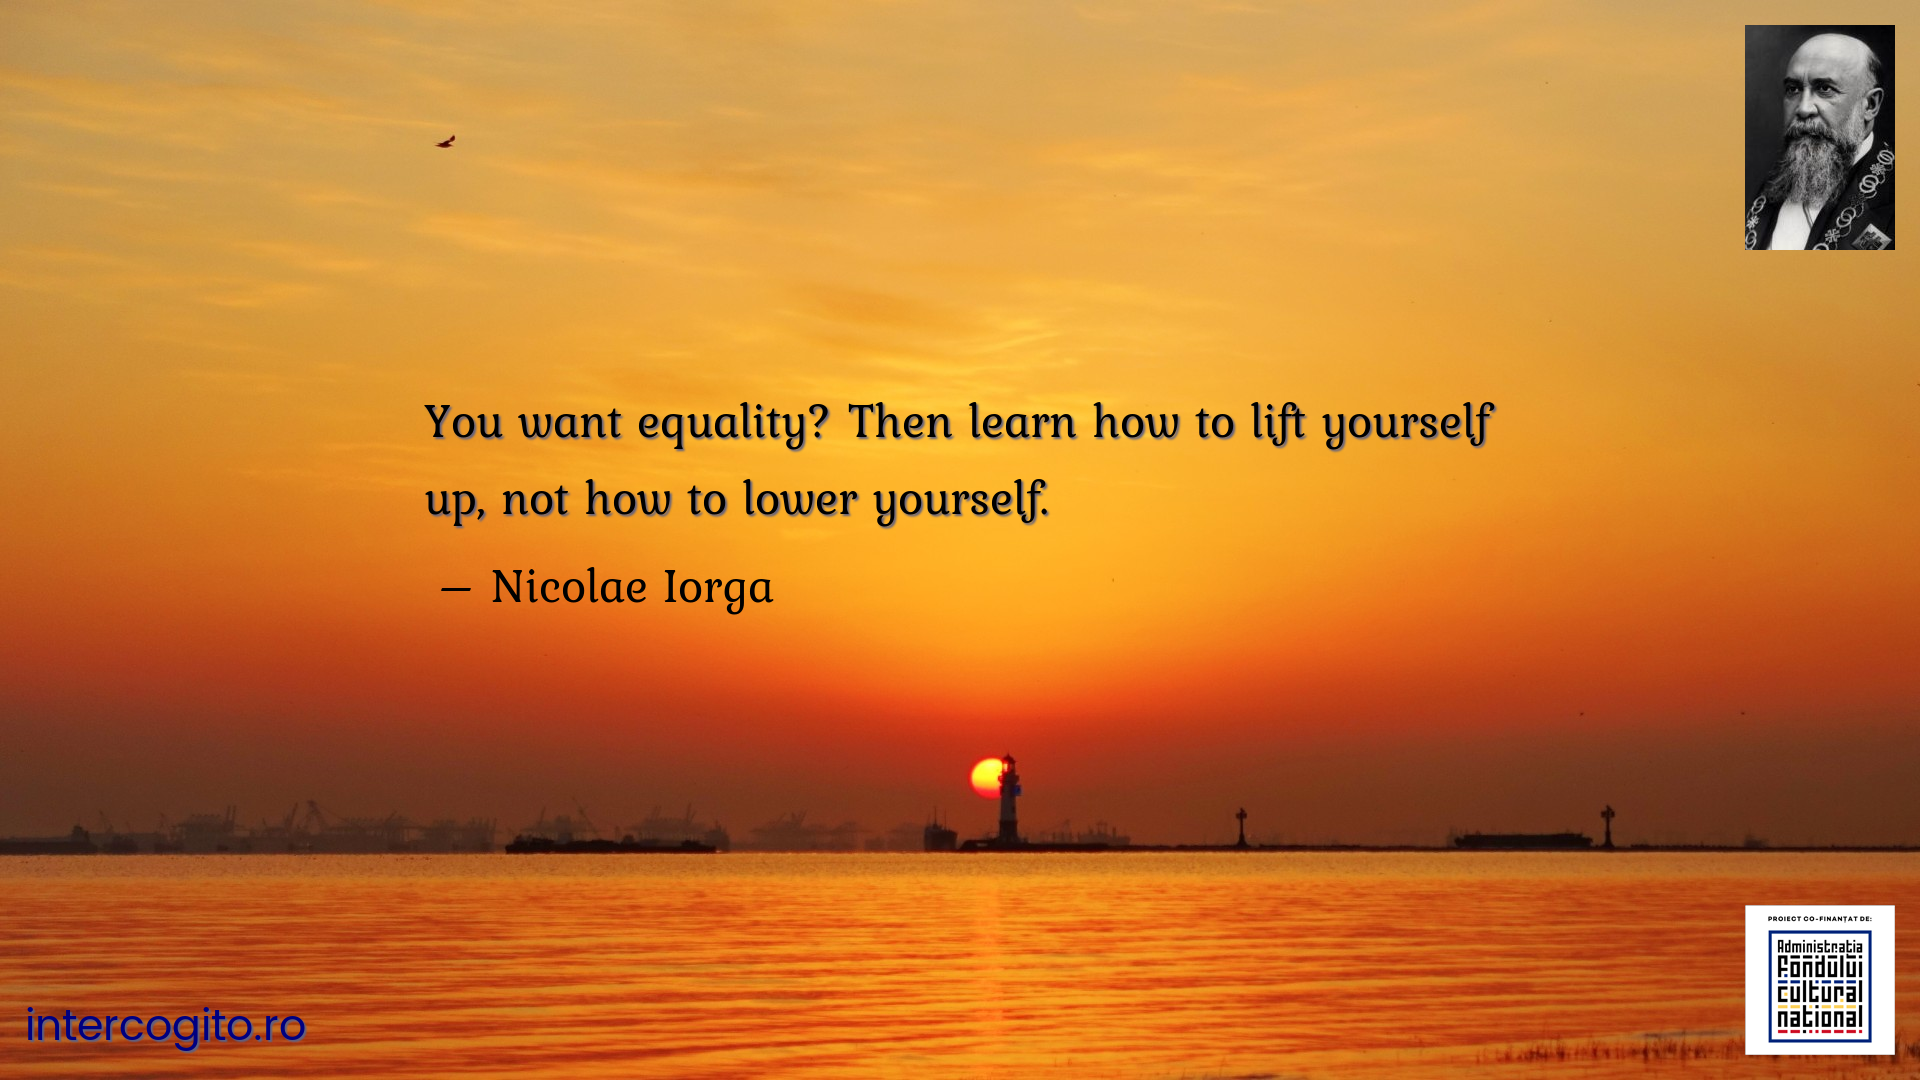 You want equality? Then learn how to lift yourself up, not how to lower yourself.